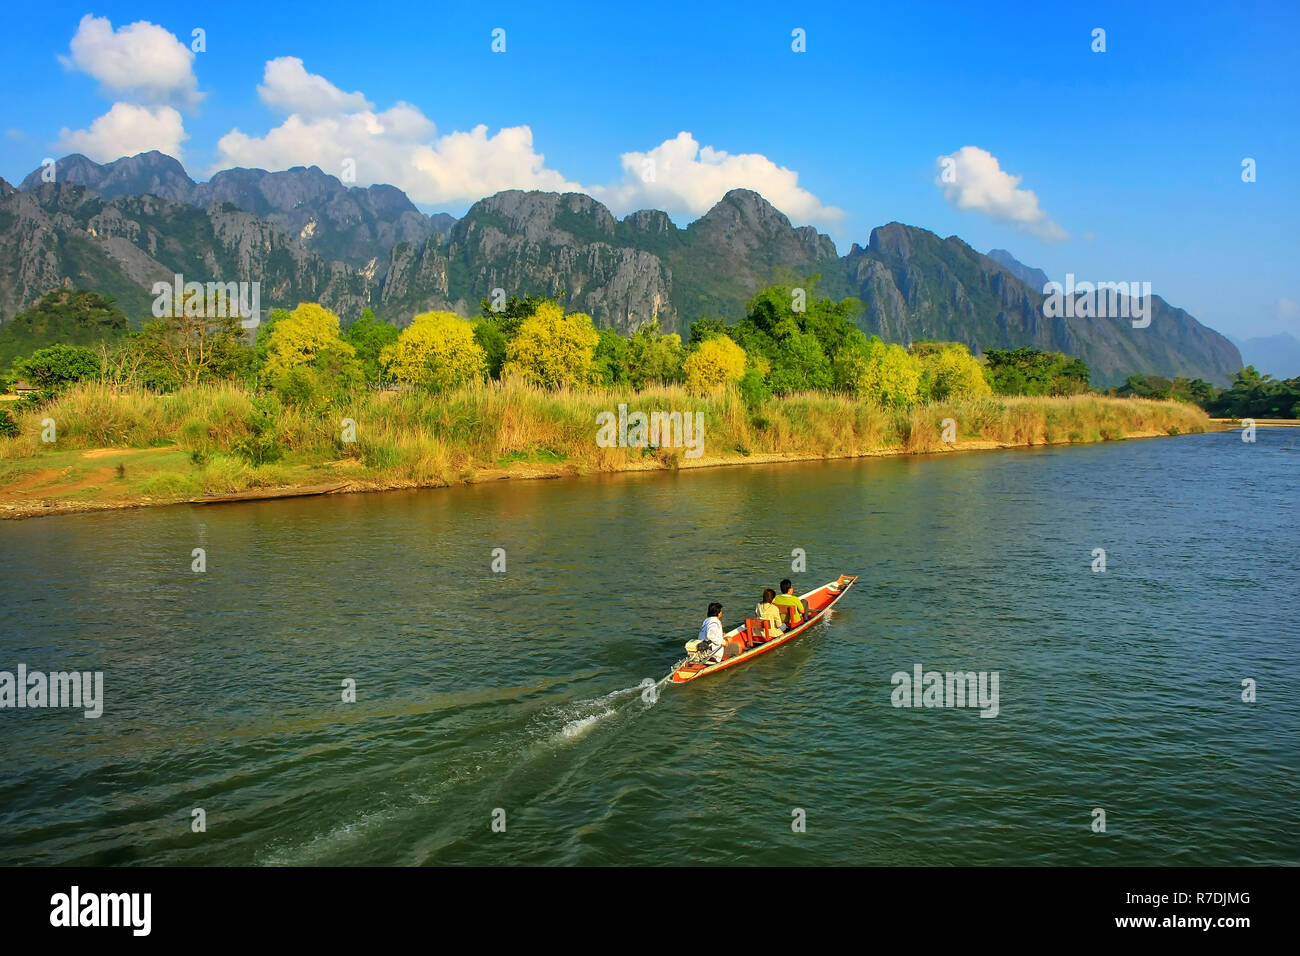 Motorboat moving on Nam Song River in Vang Vieng, Laos. Vang Vieng is a popular destination for adventure tourism in a limestone karst landscape. Stock Photo